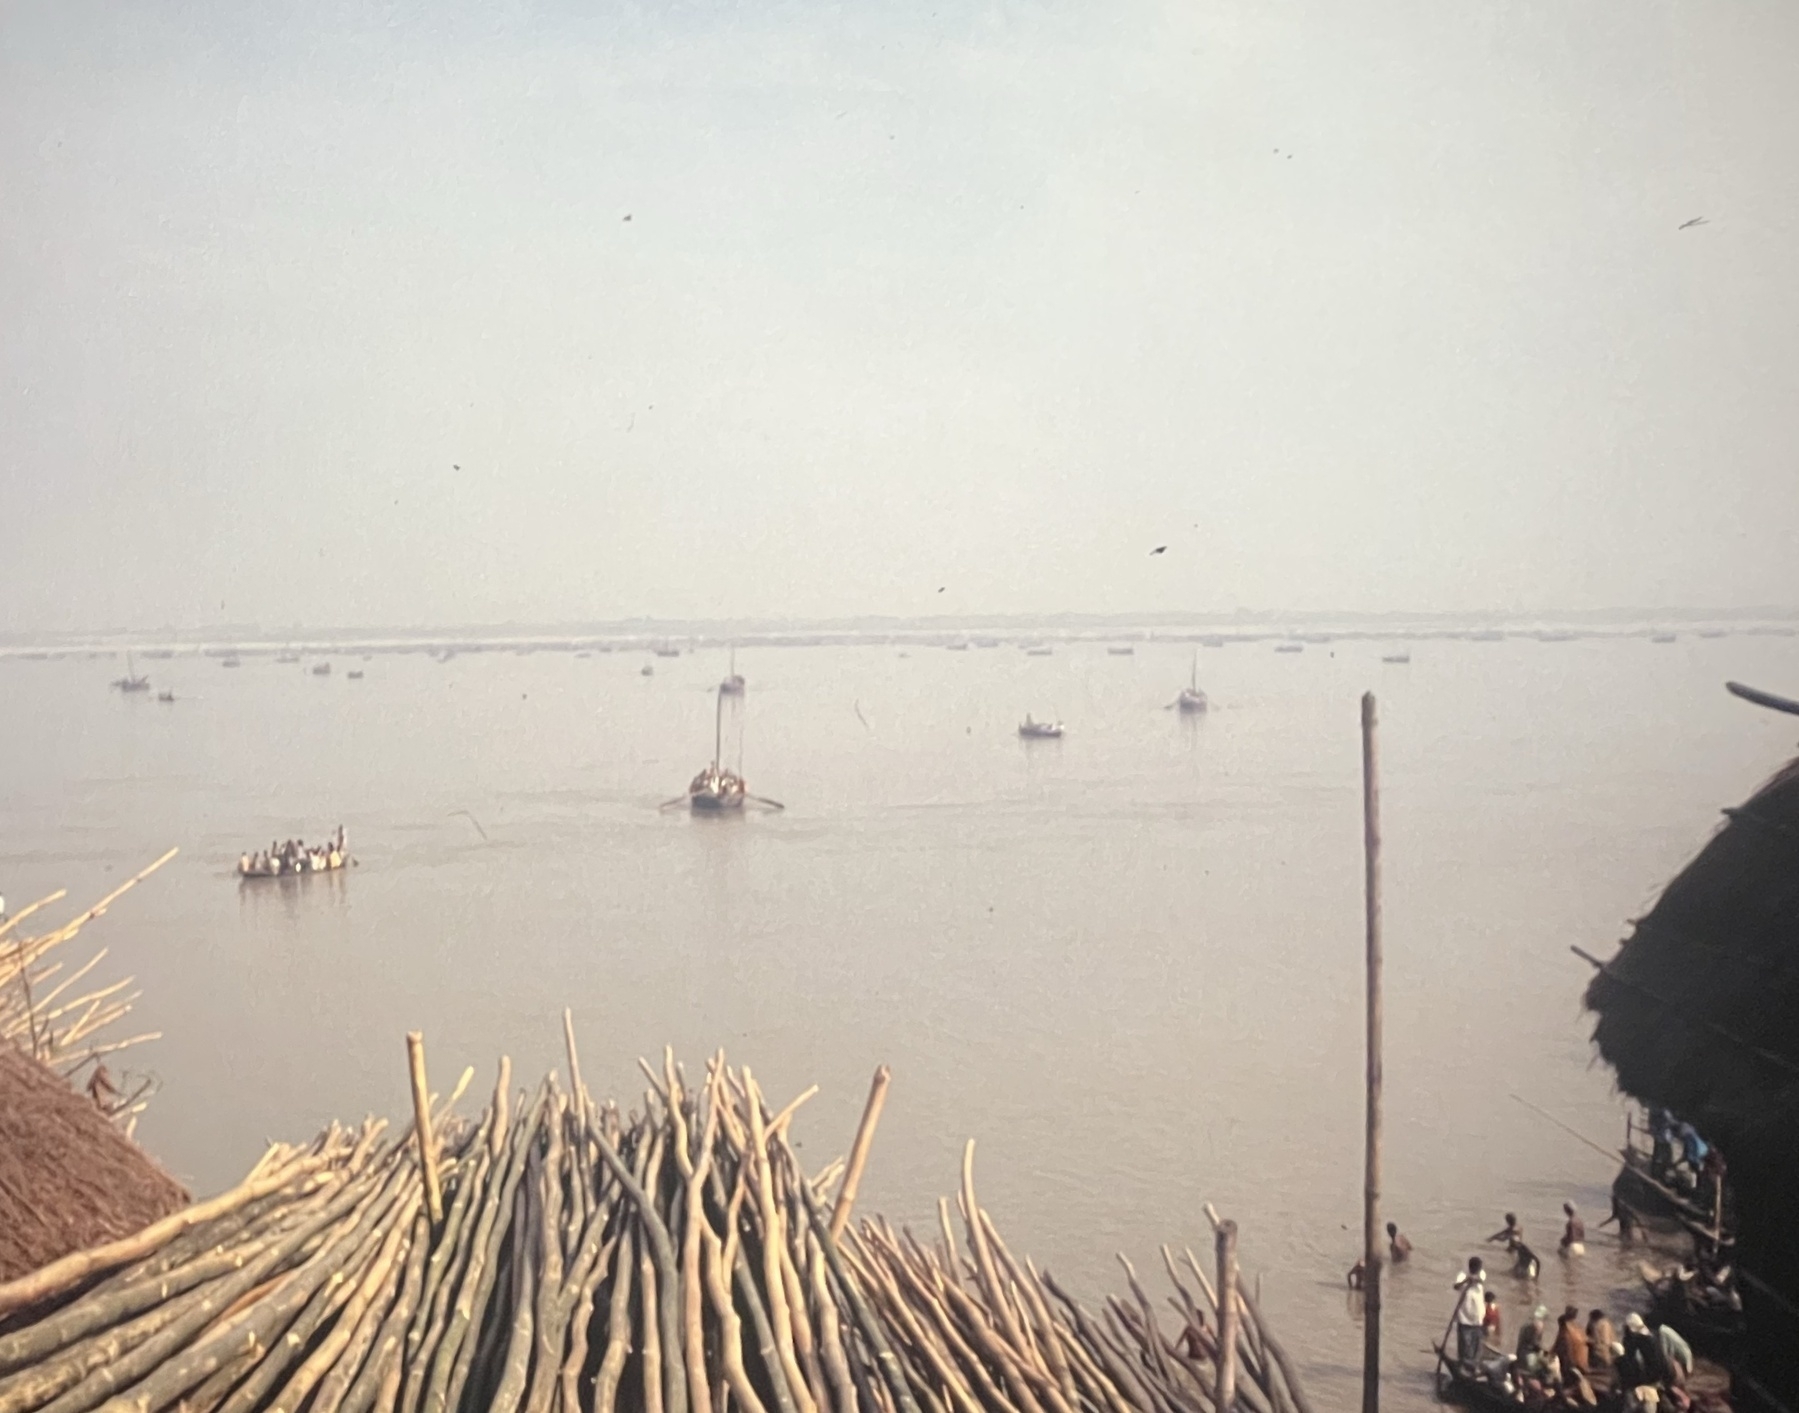 Looking down on a view over the River Ganges. It is a hazy view. In the foreground, upon which I might be sitting, are a pile of wooden poles, a couple of thatched roofs are to each side. The river has a variety of boats on them of different sizes, all full of people, and none motorized but rowed